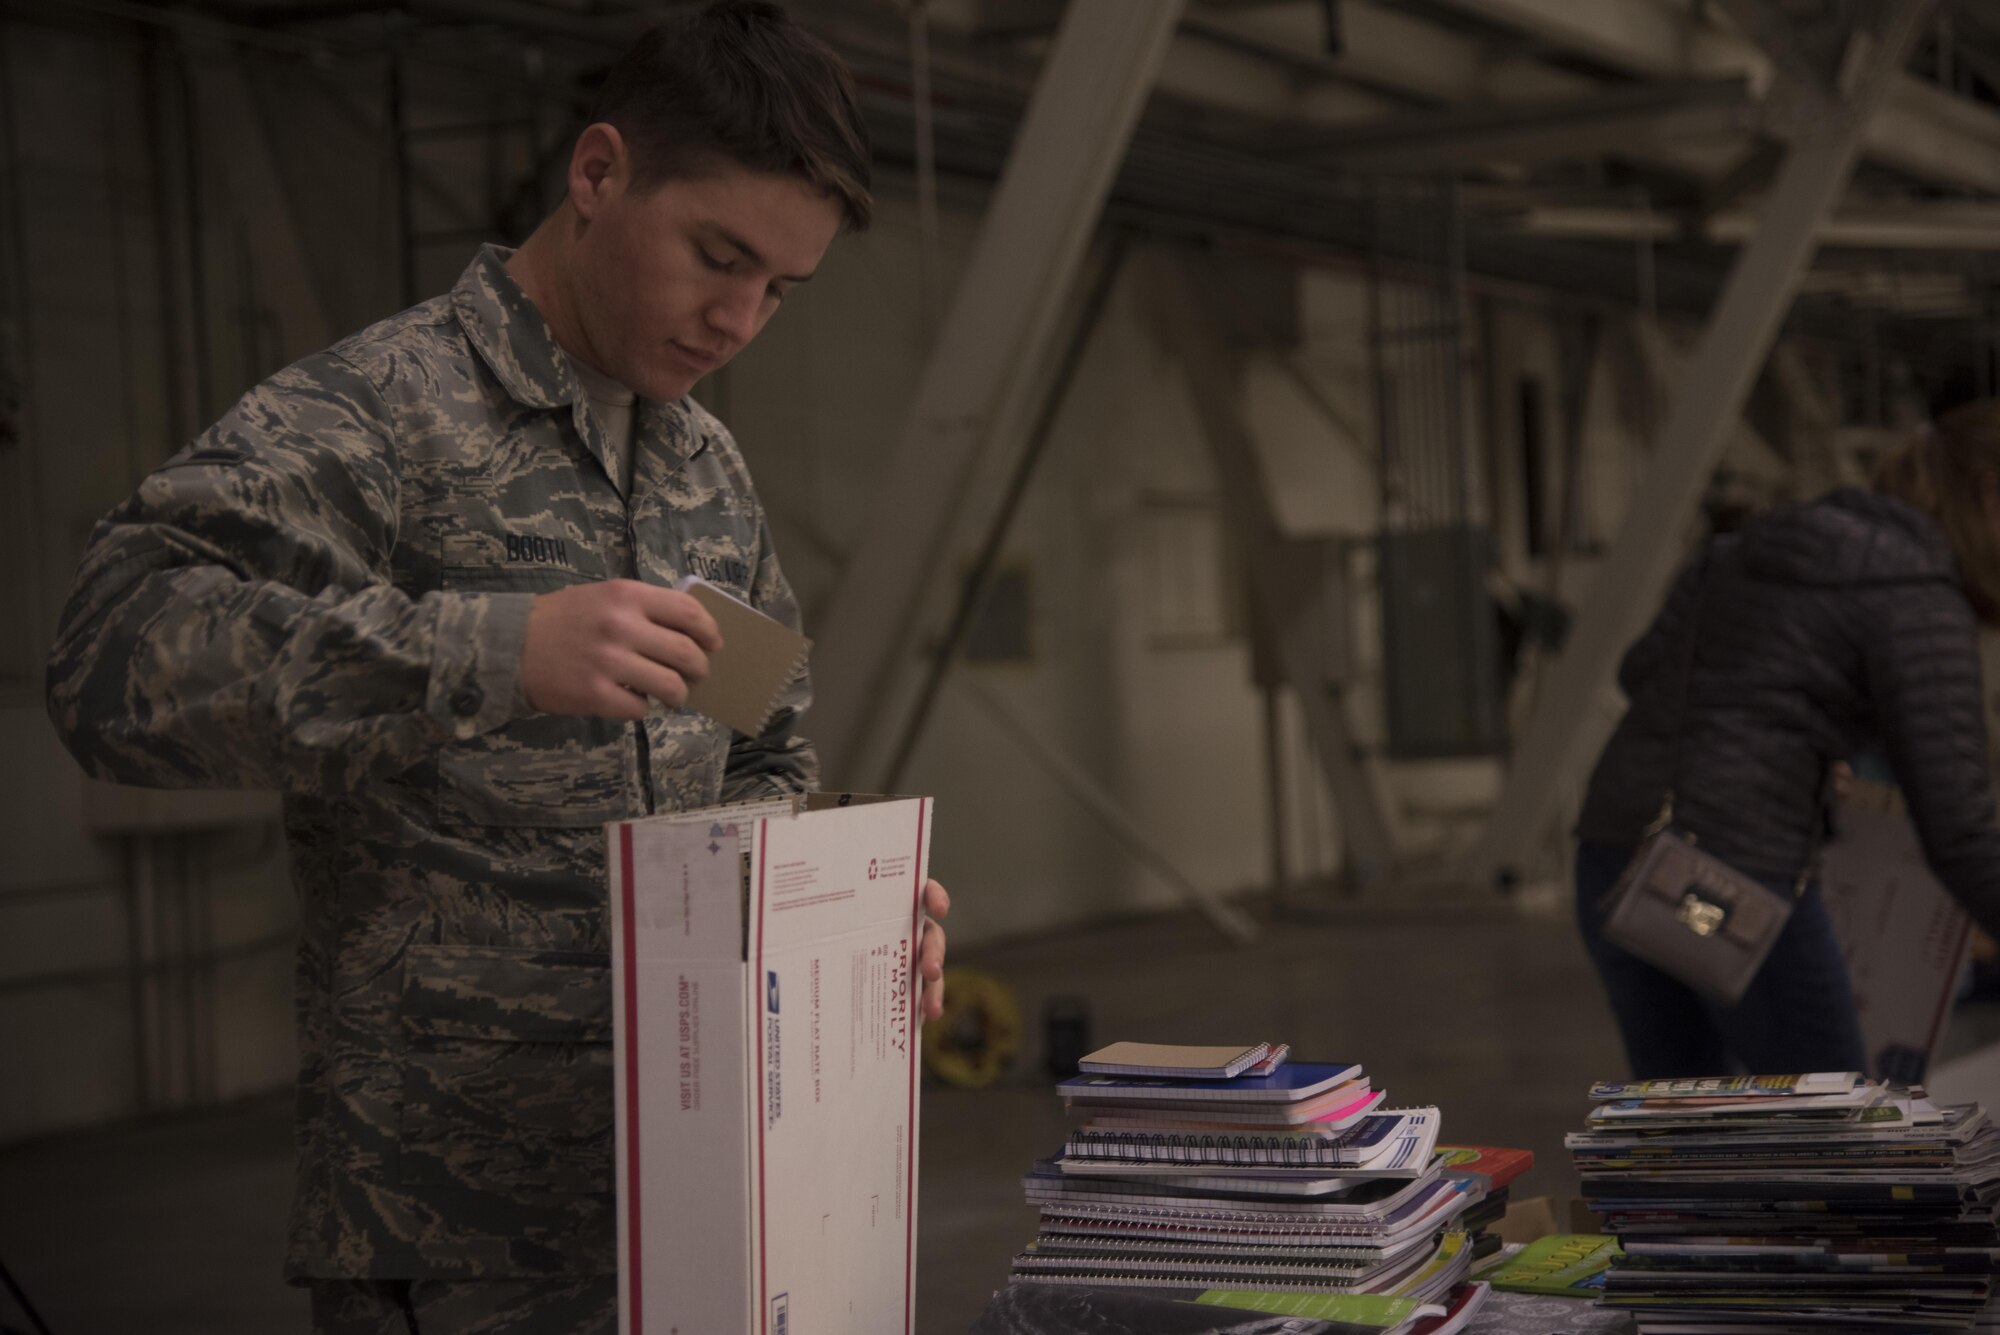 Airman Paul Booth, 92nd Aircraft Maintenance Squadron crew chief, places a notepad into a care package Dec. 1, 2016 at Fairchild Air Force Base. Booth volunteered to fill shipping boxes with various items such as soap, hot sauce, wet wipes and beef jerky. The boxes were packed as part of KREM 2 News Treats 2 Troops program that provides deployed military members with care packages. (U.S. Air Force photo/Senior Airman Nick J. Daniello)